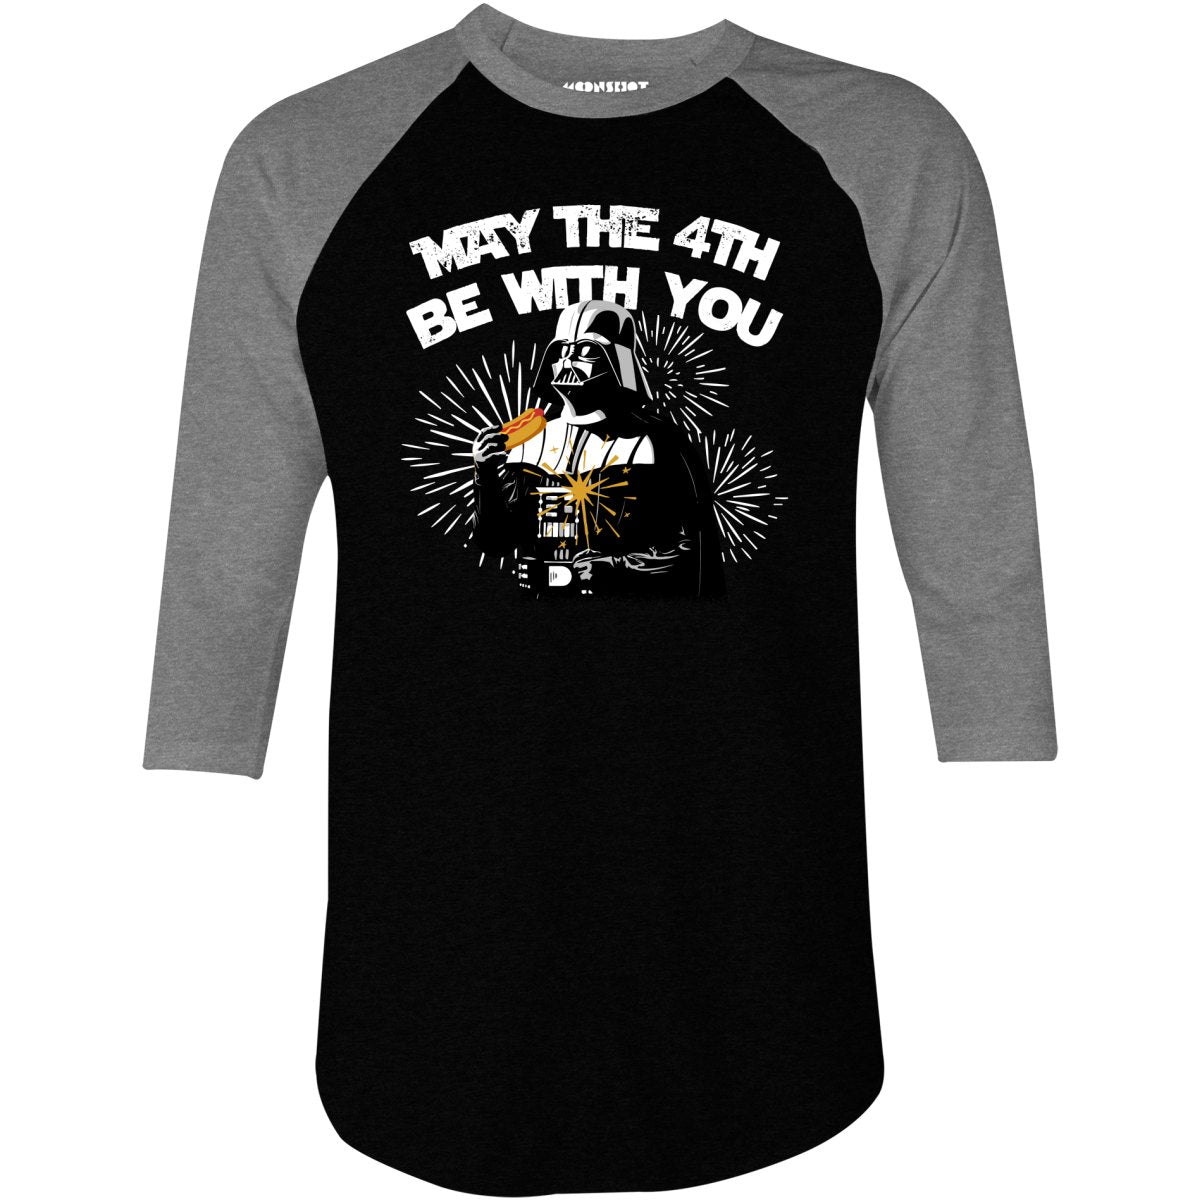 May The 4th Be With You - 3/4 Sleeve Raglan T-Shirt